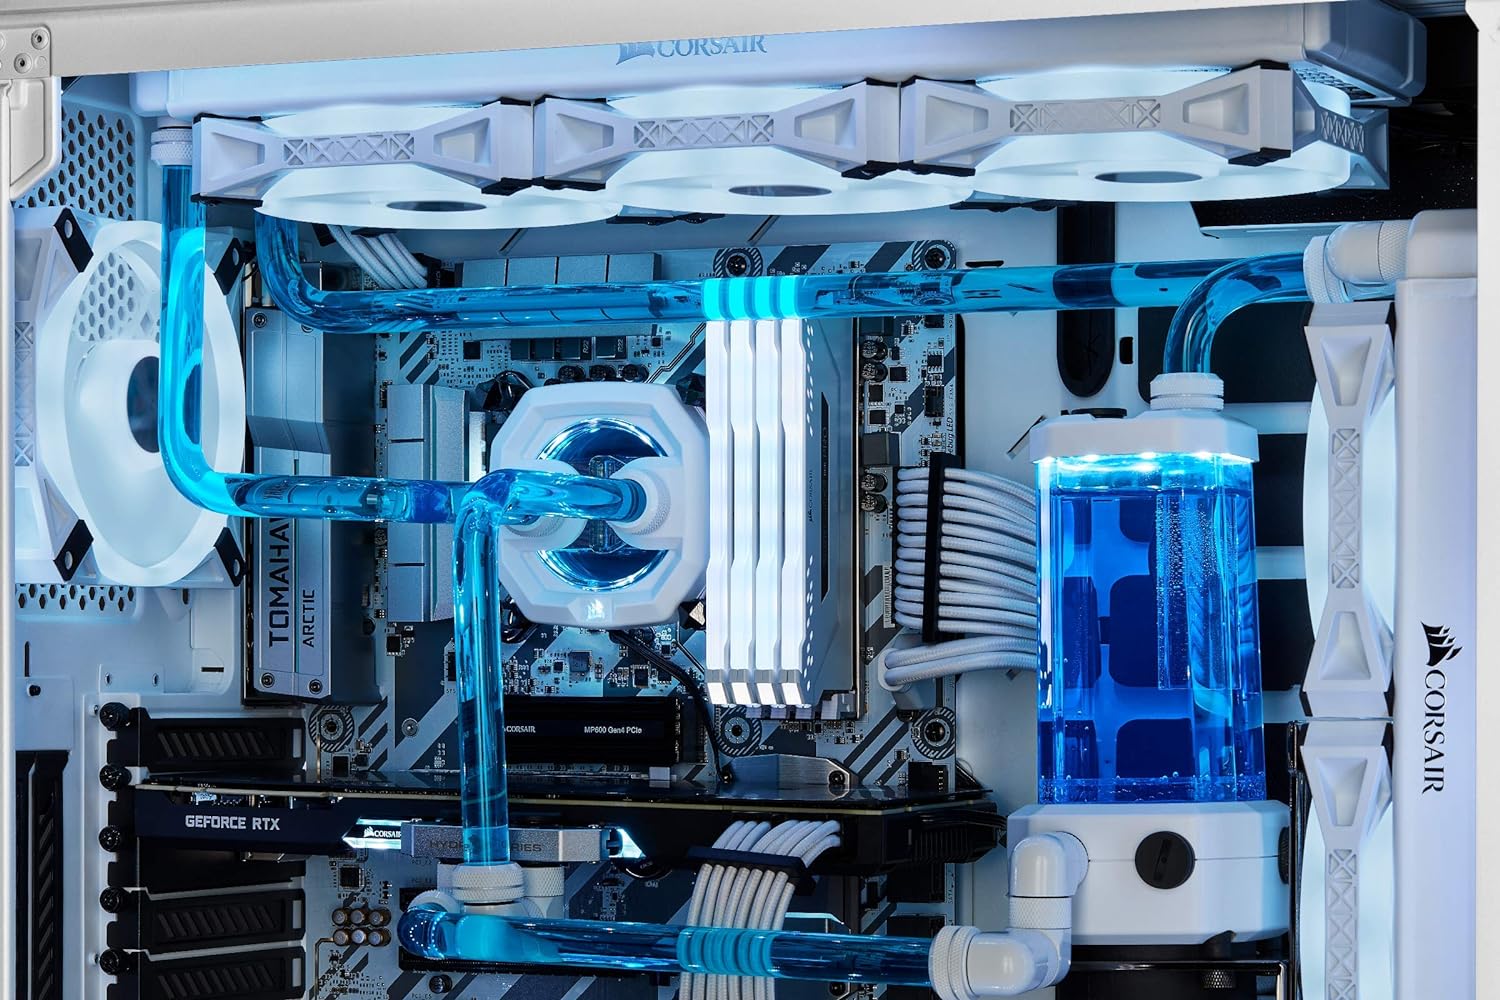 Liquid cooling options for overclocking enthusiasts